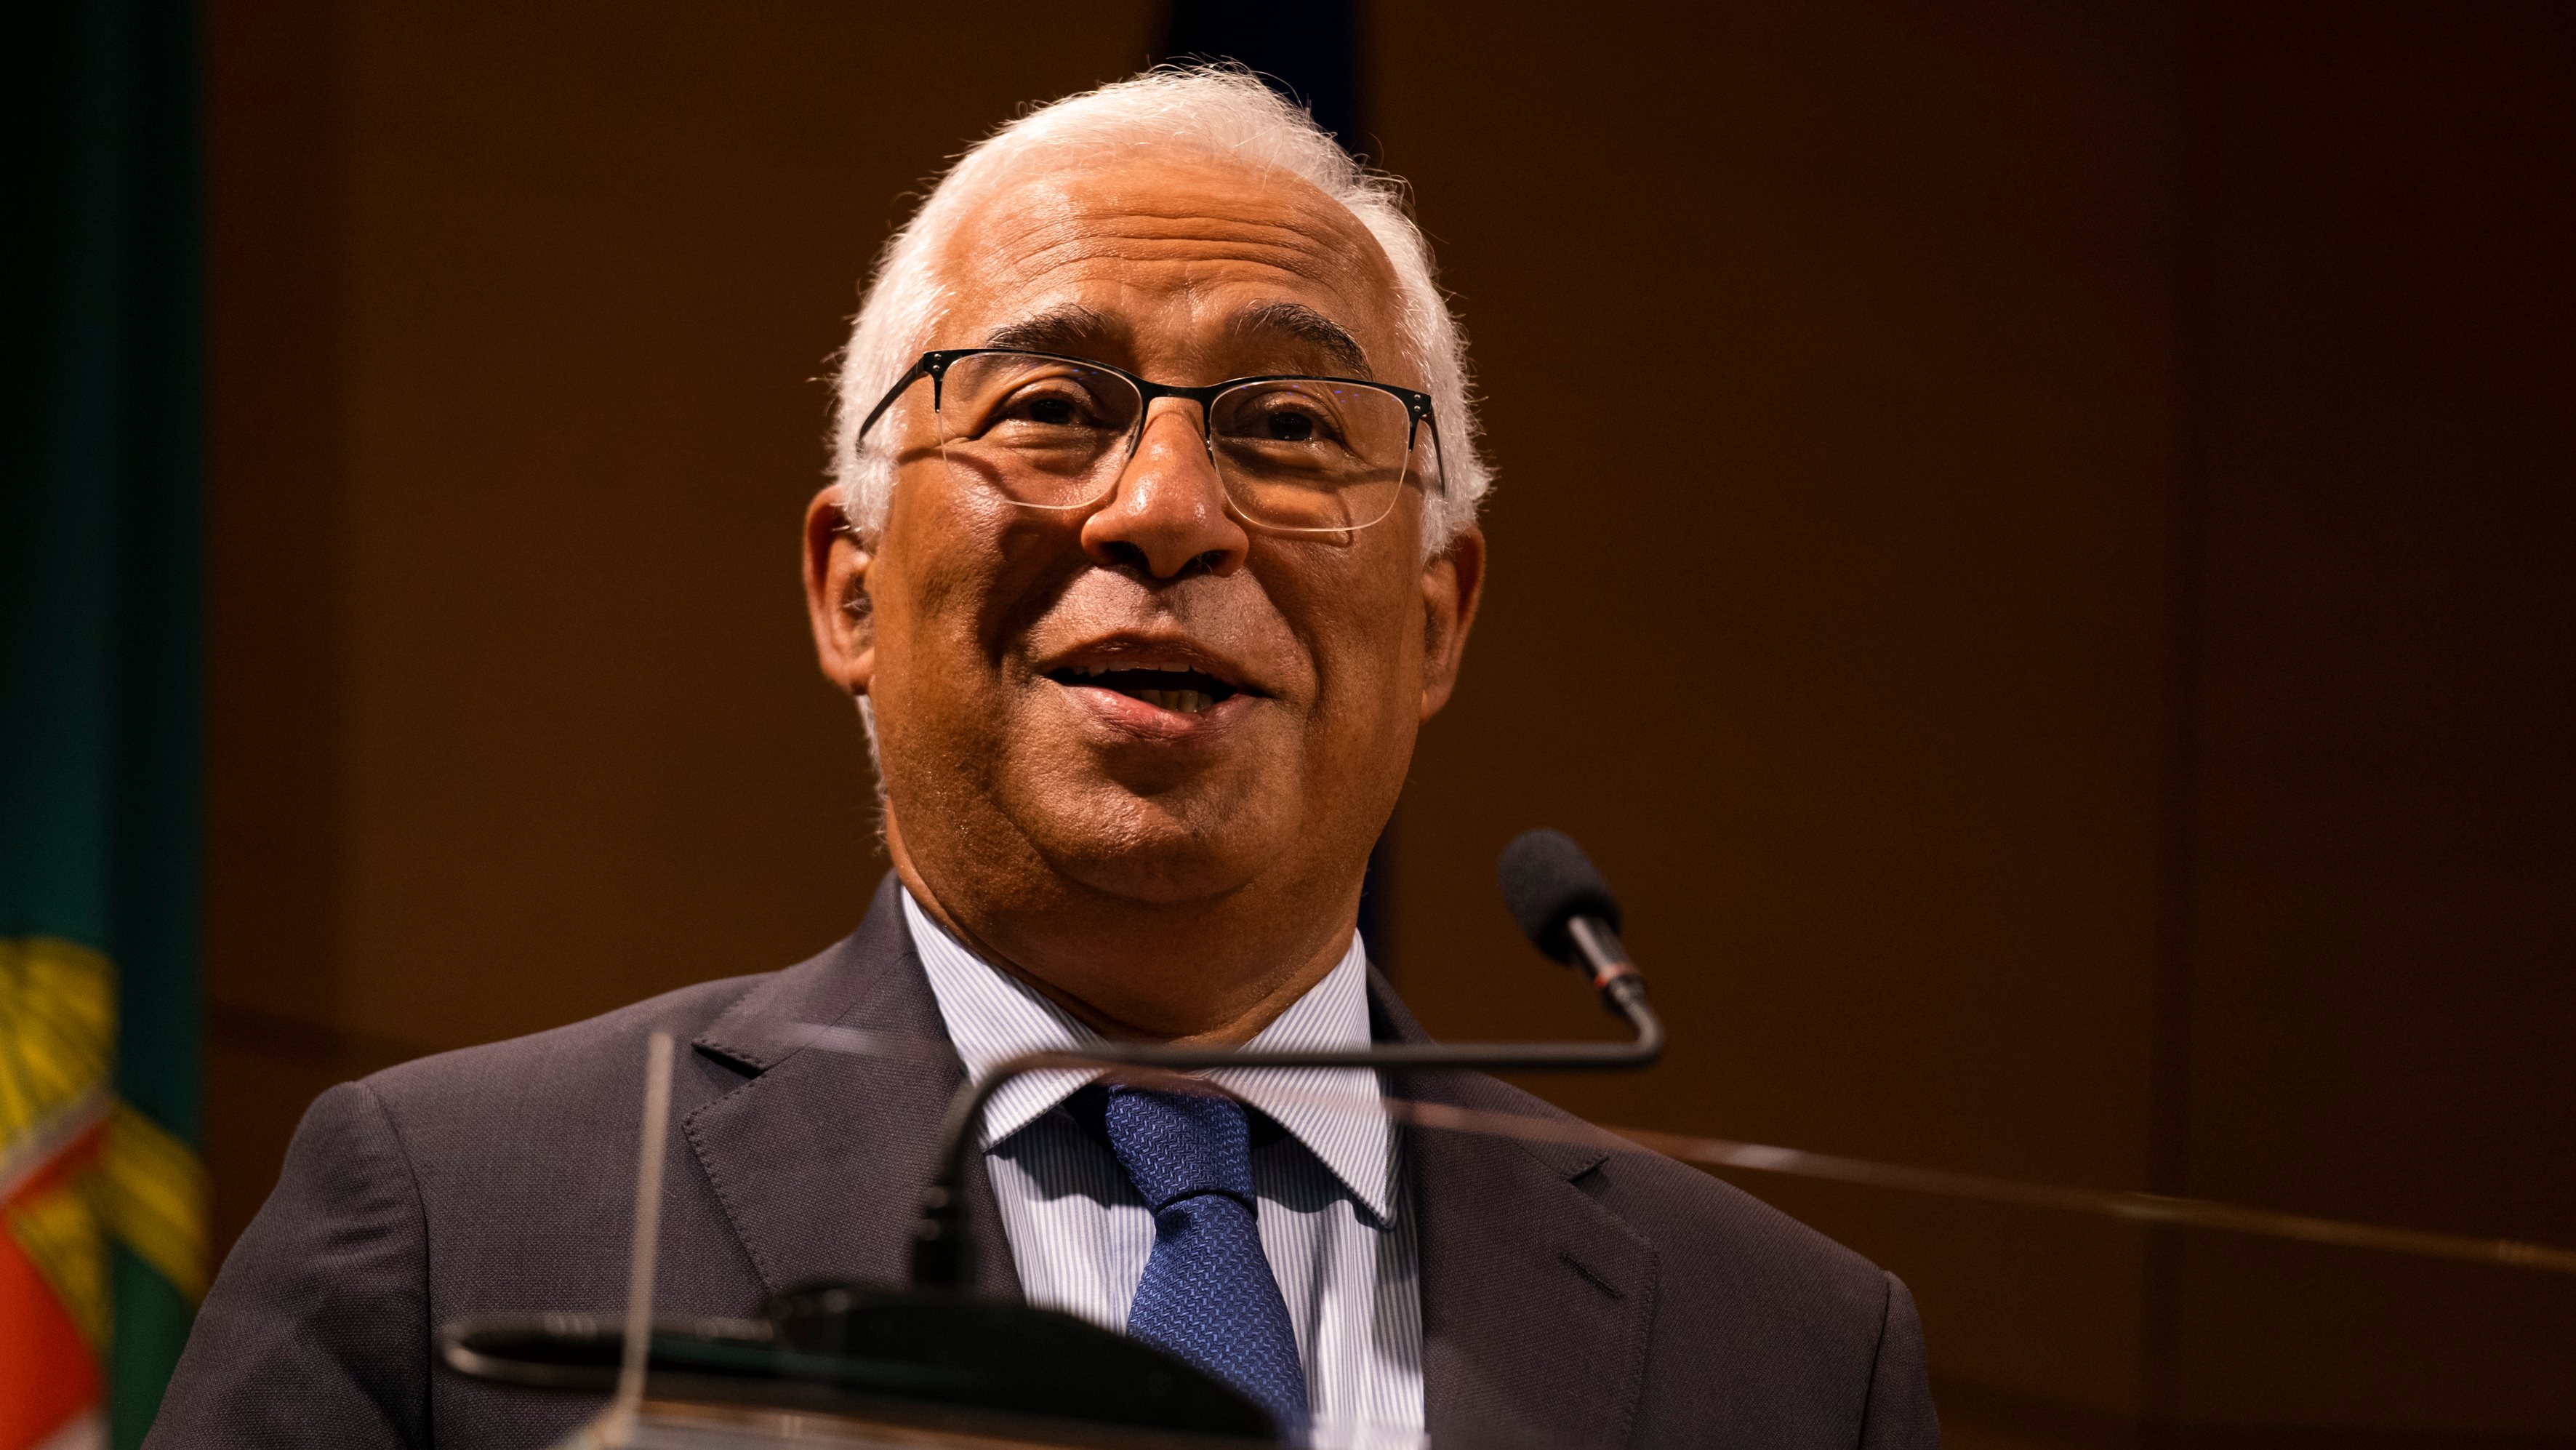 Prime Minister Antonio Costa At The Ceremony Of The New Inspectors Of The Judiciary Police